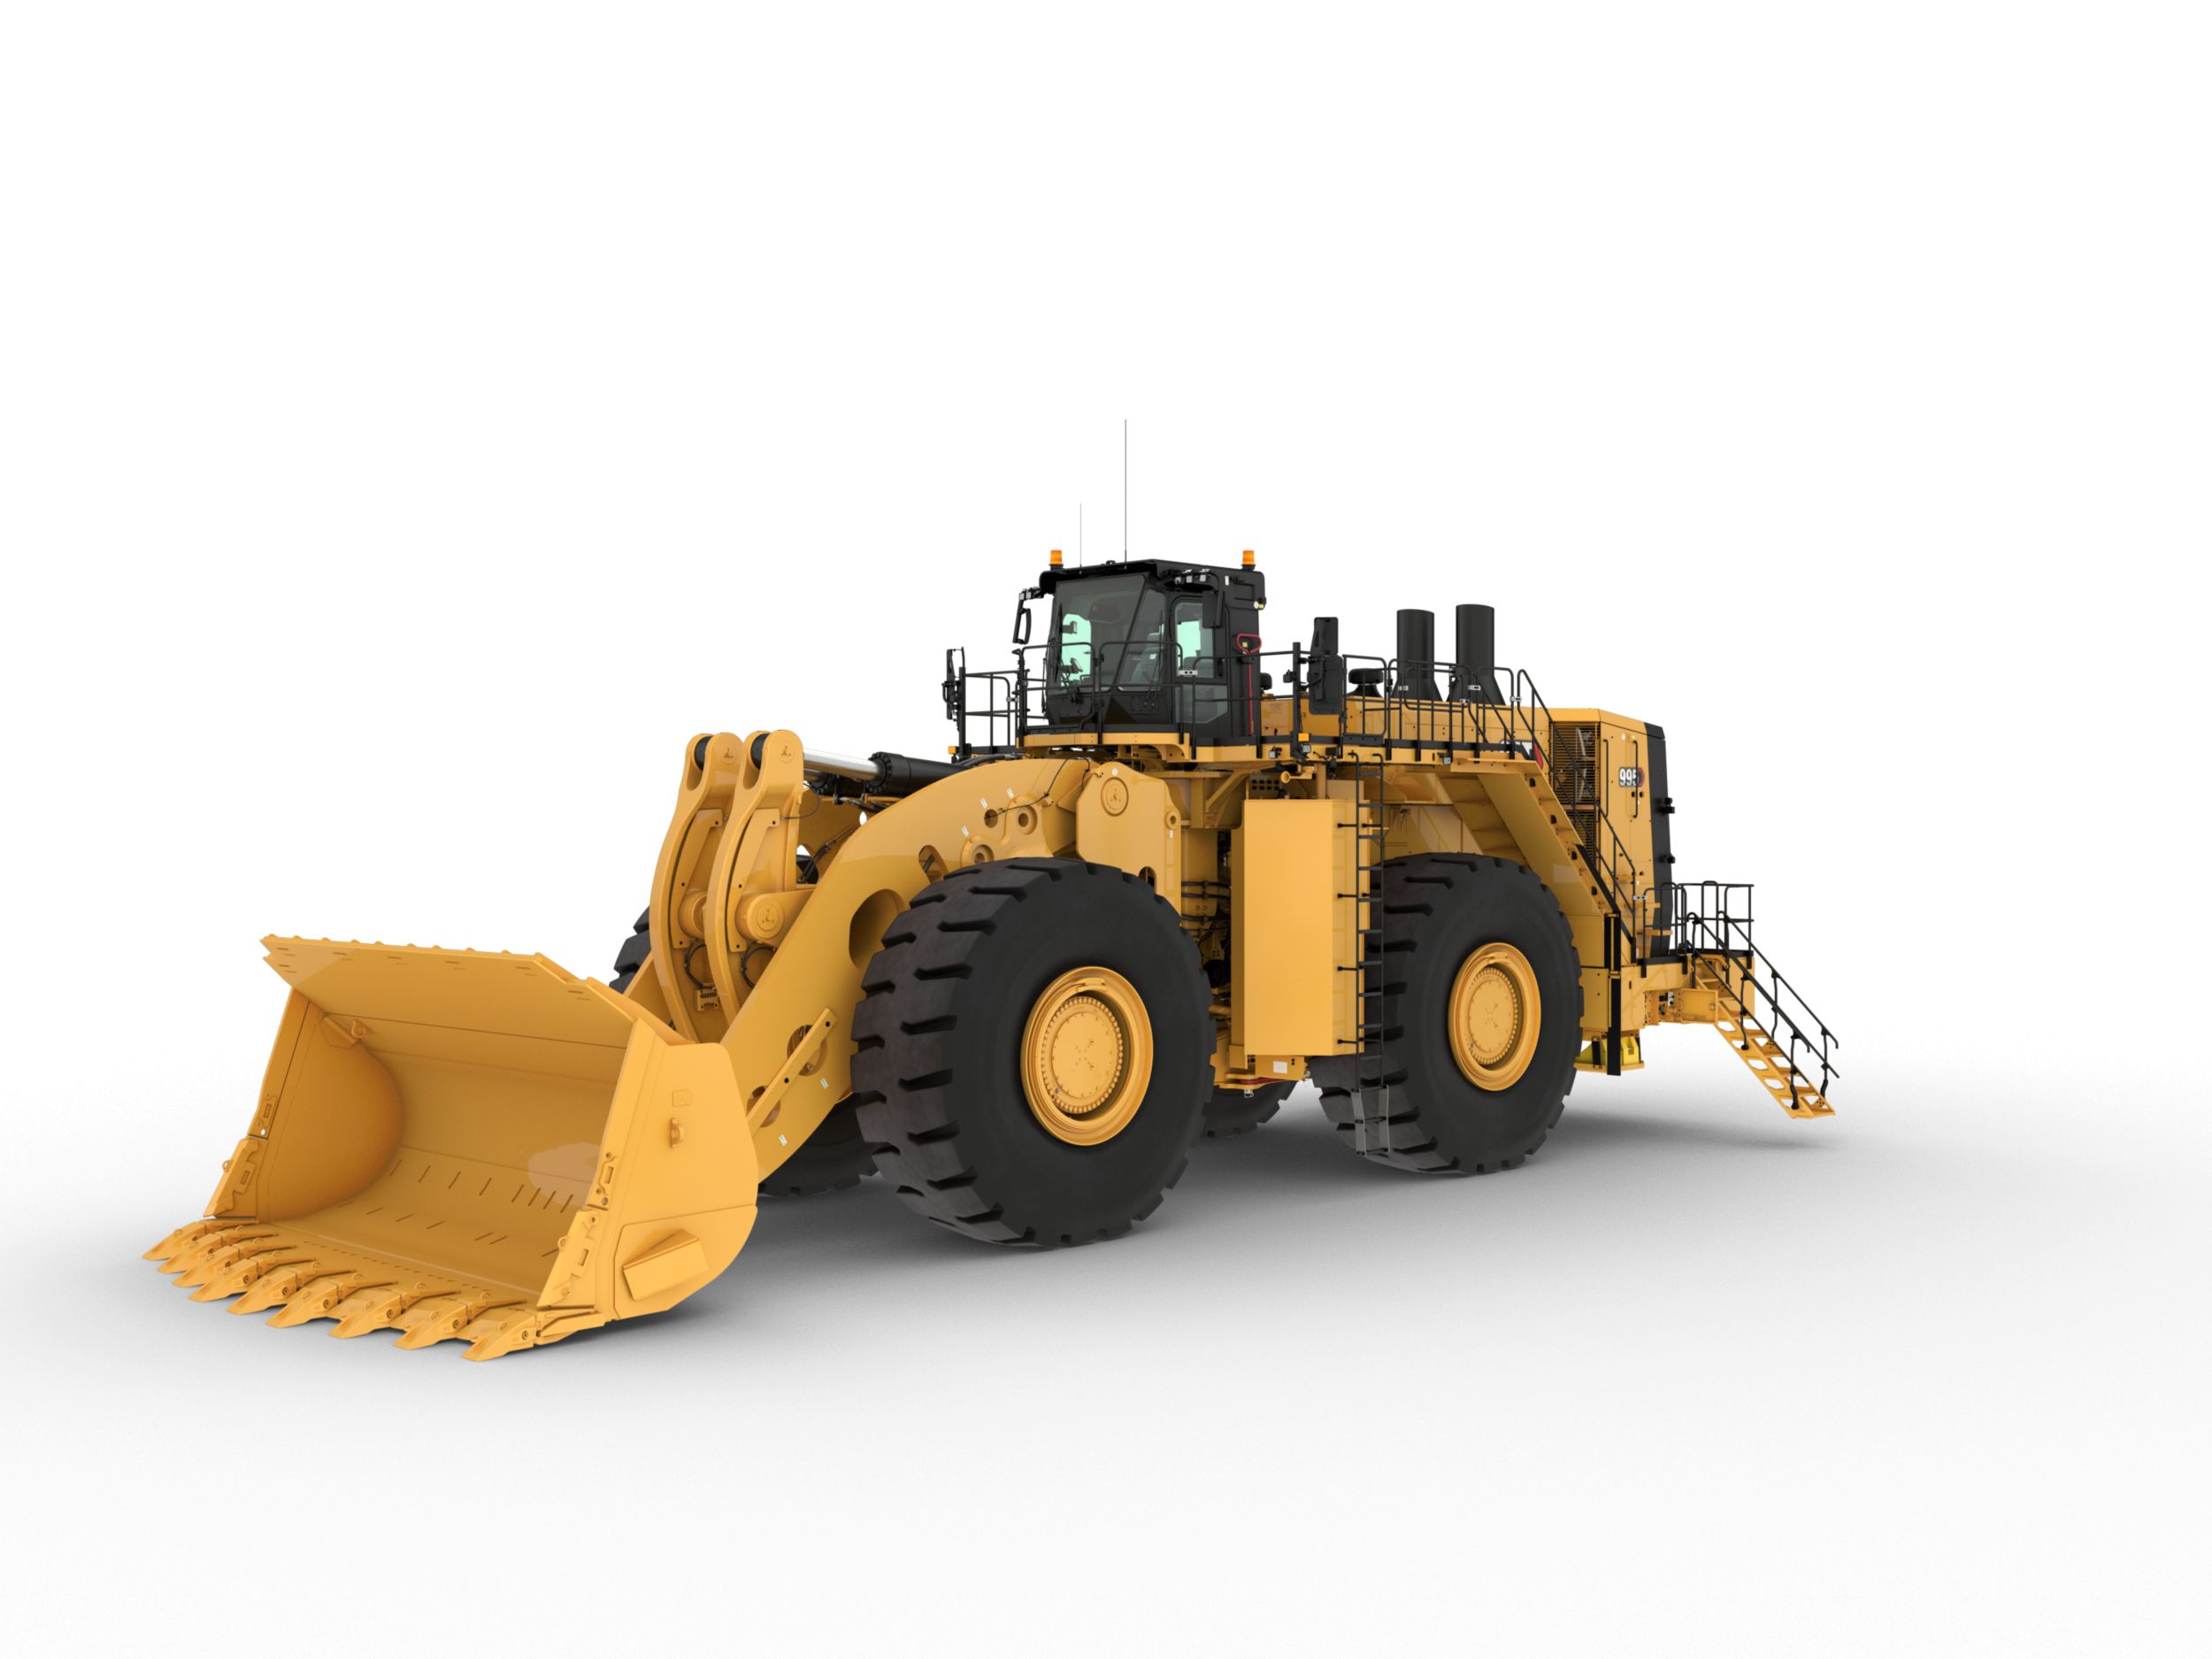 The Leading Mining Loader in Its Class